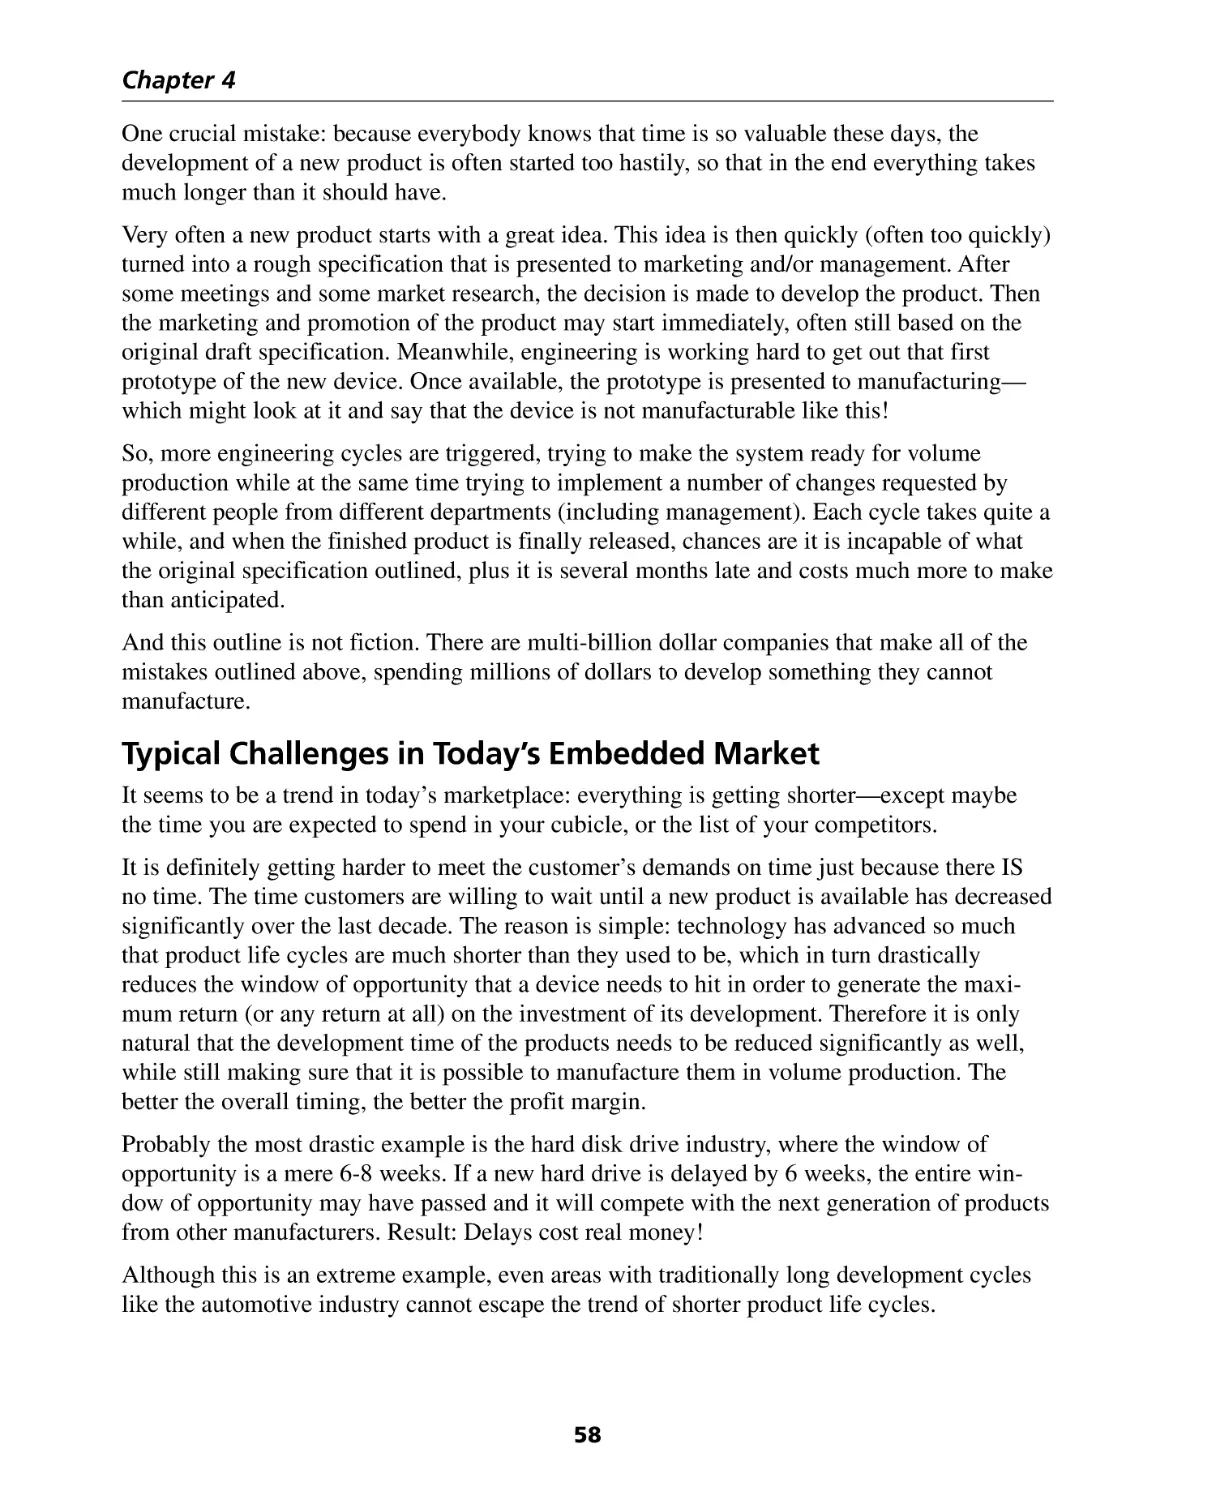 Typical Challenges in Today’s Embedded Market